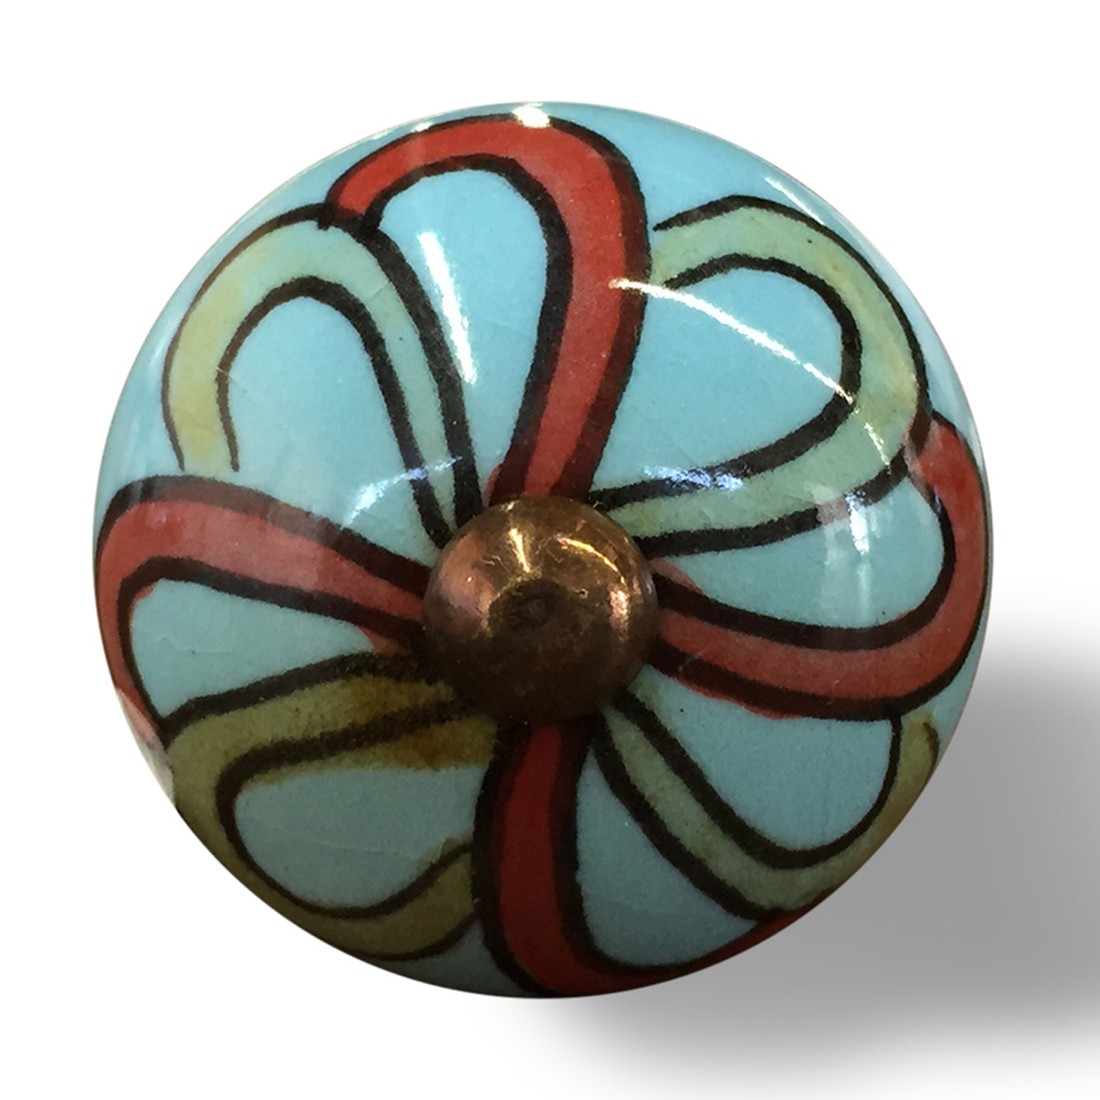 1.5" x 1.5" x 1.5" Turquoise, Red and Green - Knobs 12-Pack